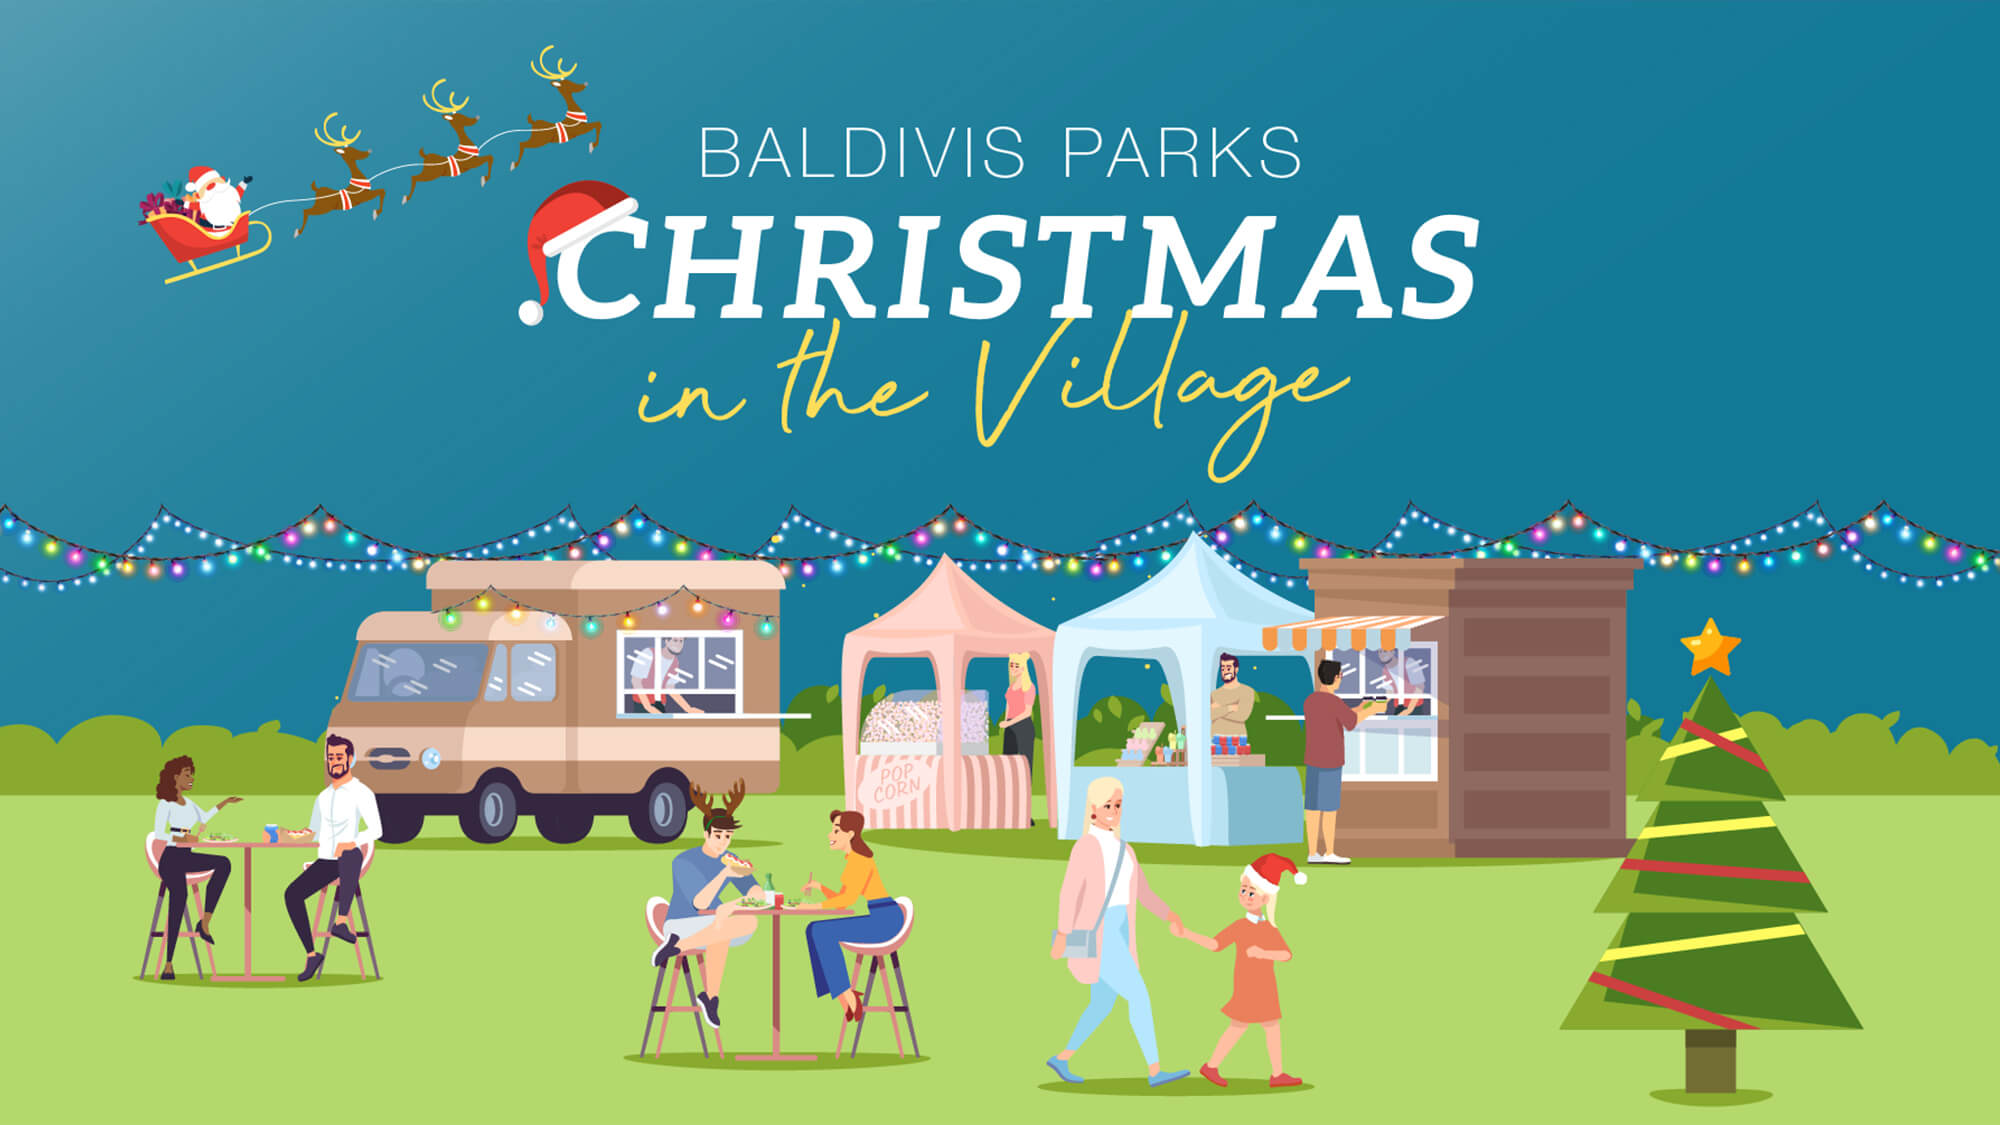 Christmas in the Village - Baldivis Parks